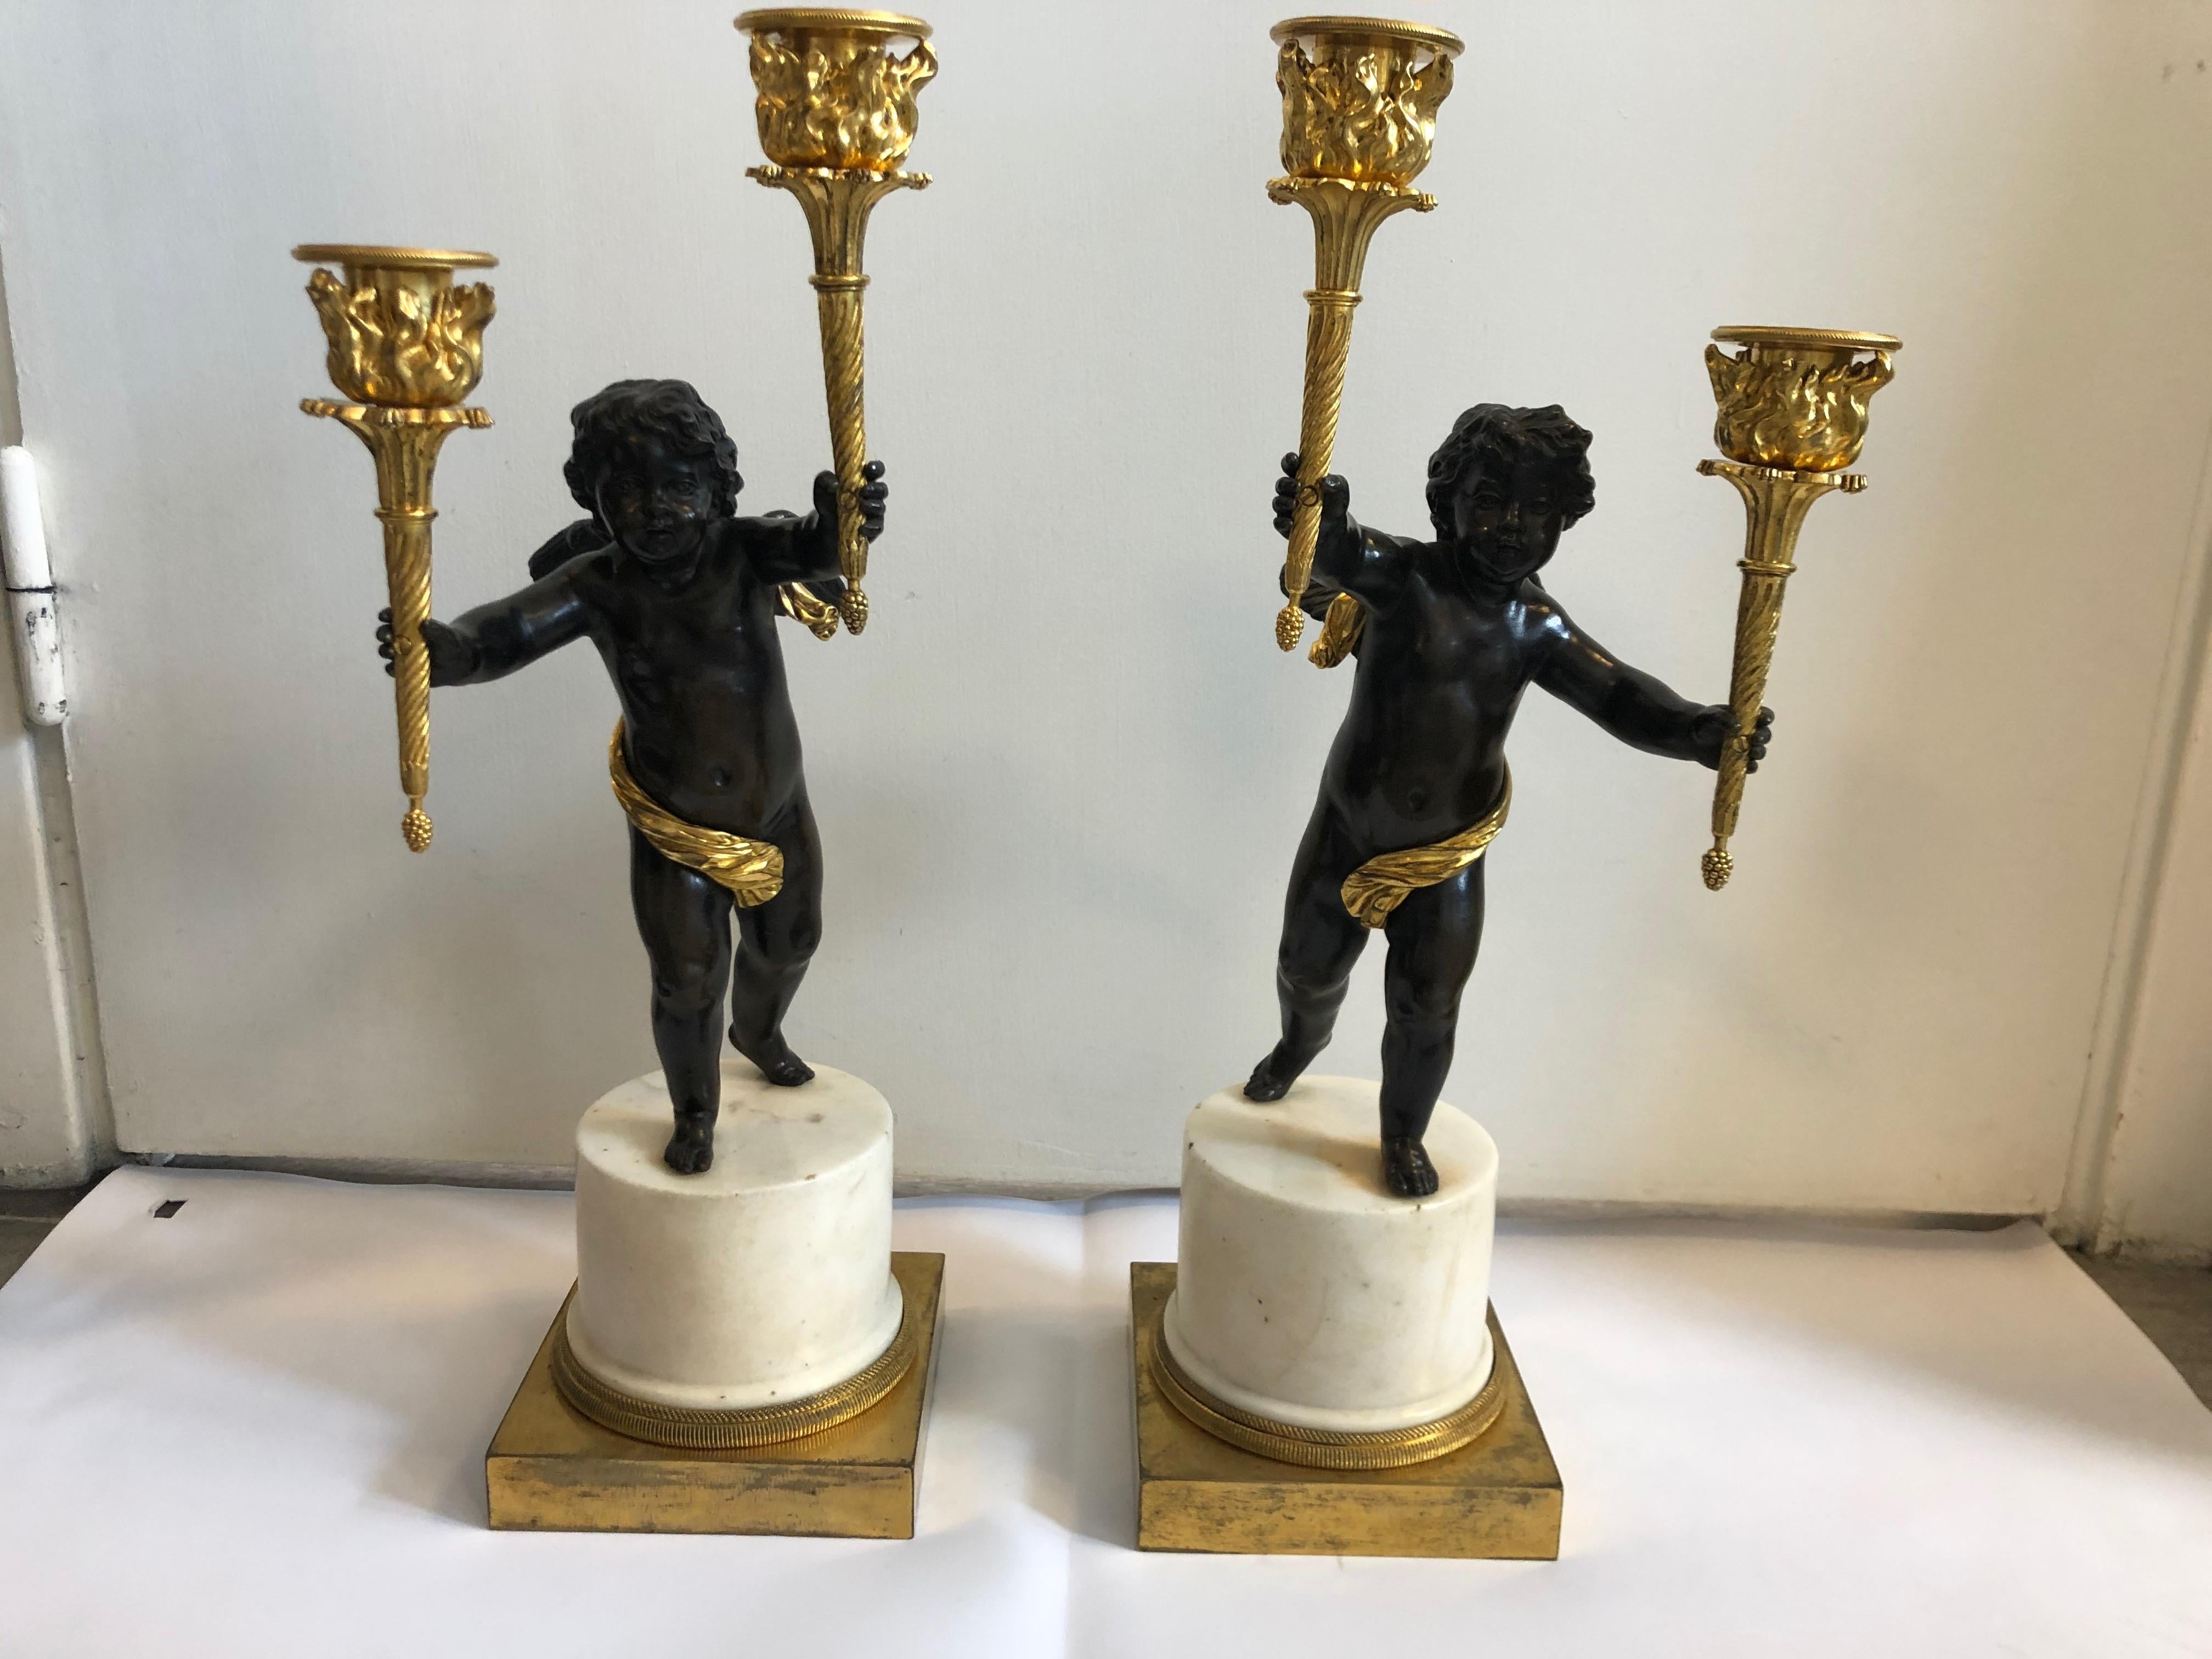 A pair of French candelabra, gilt and black patinated bronze together with white marble. Puttis standing on columns holding torches in both hands.